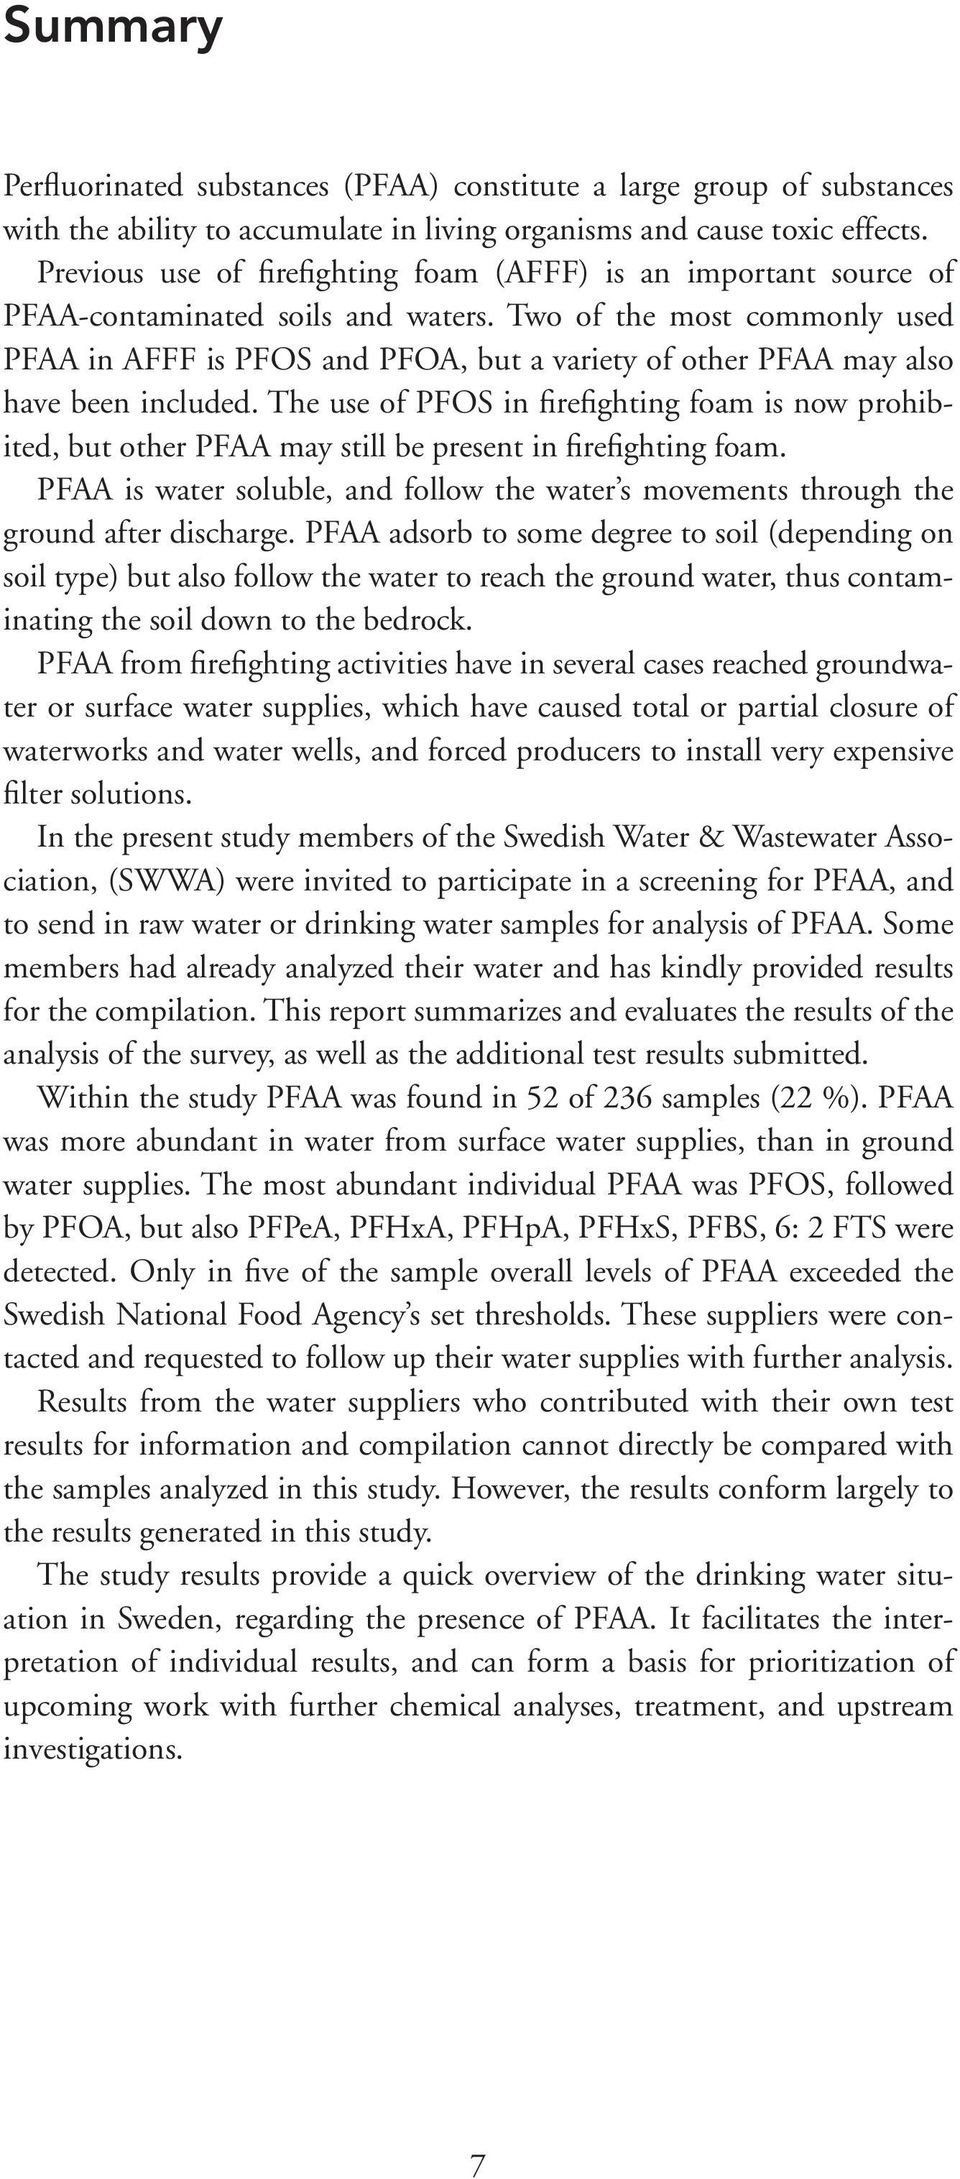 Two of the most commonly used PFAA in AFFF is PFOS and PFOA, but a variety of other PFAA may also have been included.